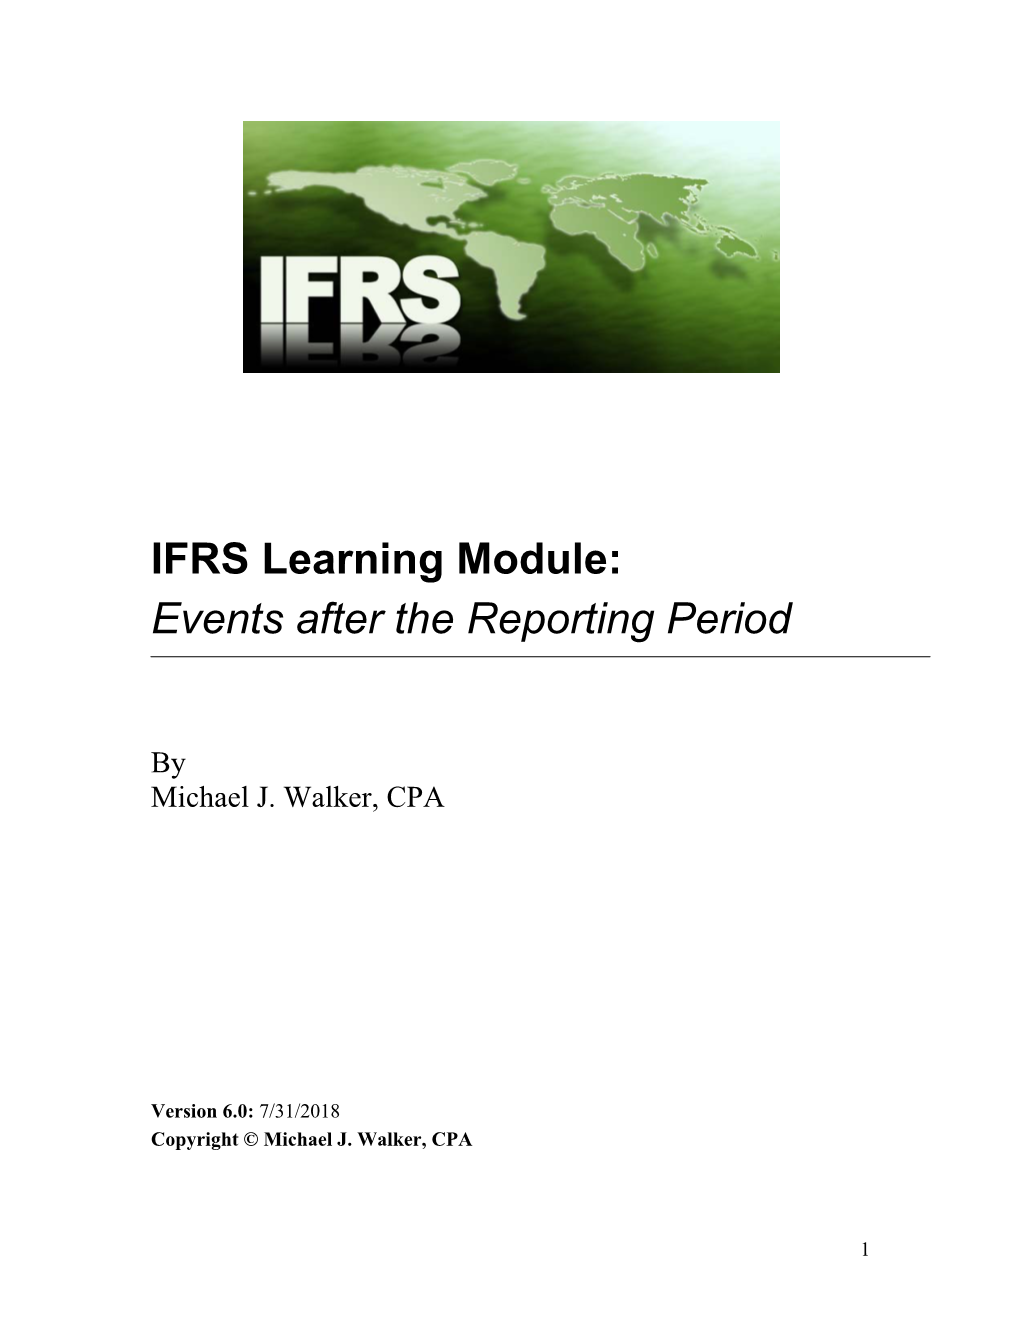 IFRS Learning Module: Events After the Reporting Period